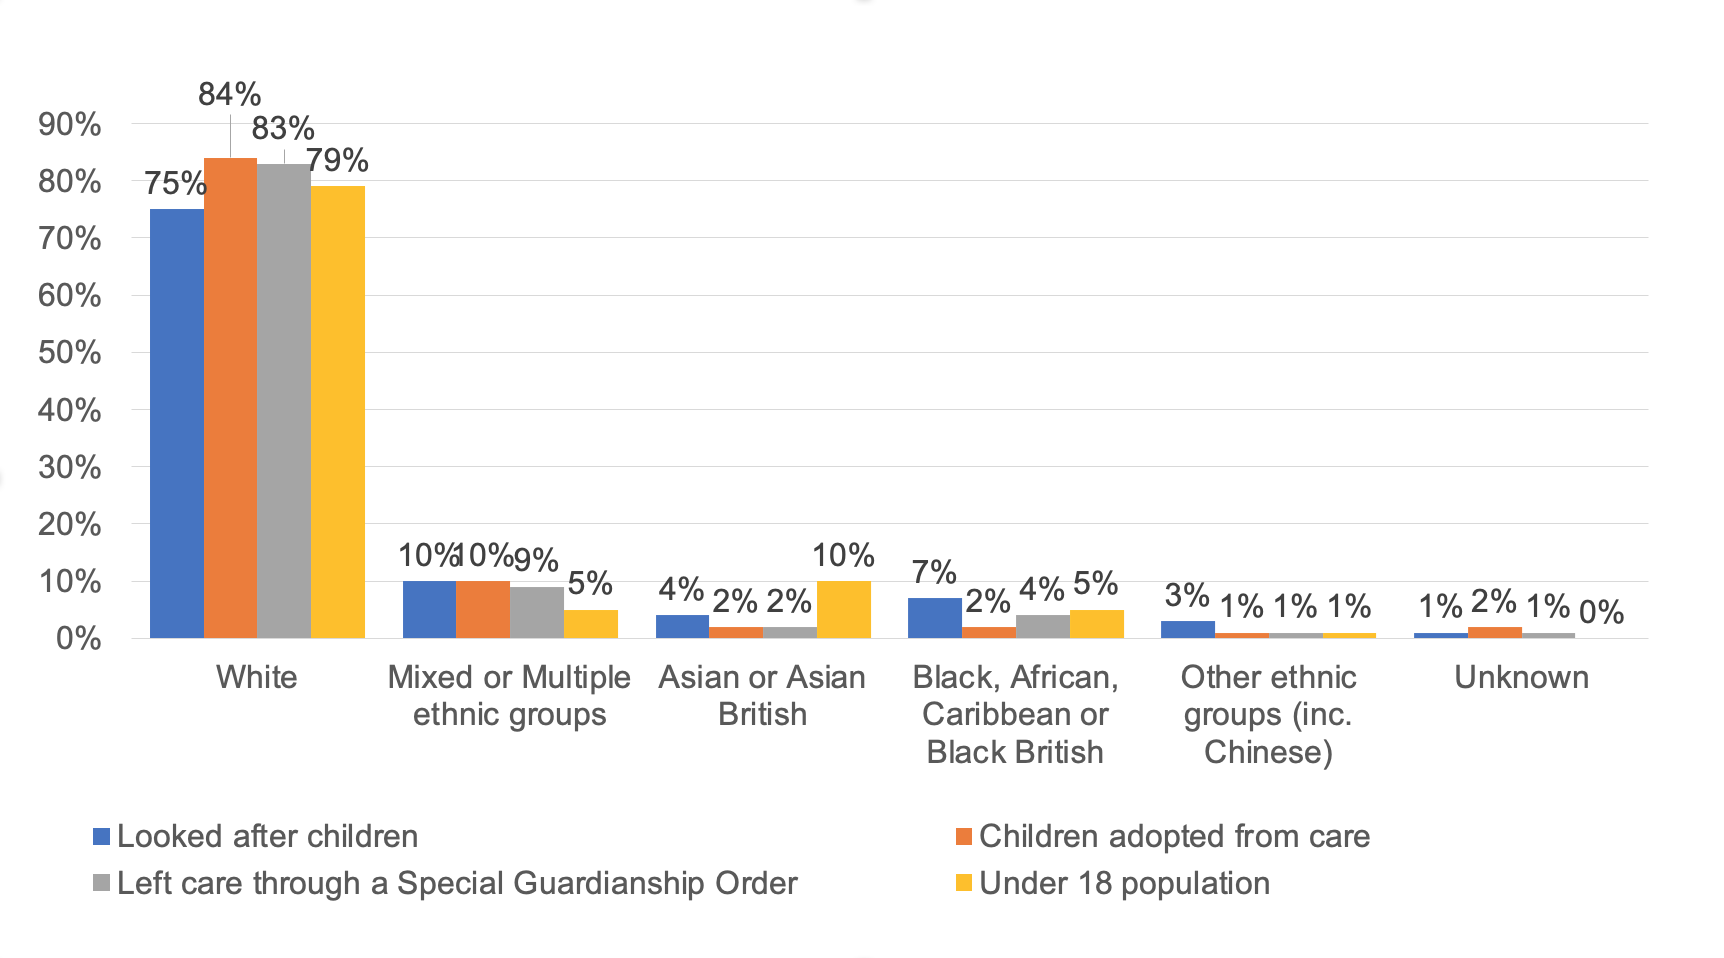 Ethnicity of Looked After Children, Adoptions and SGOs compared to population by percentage